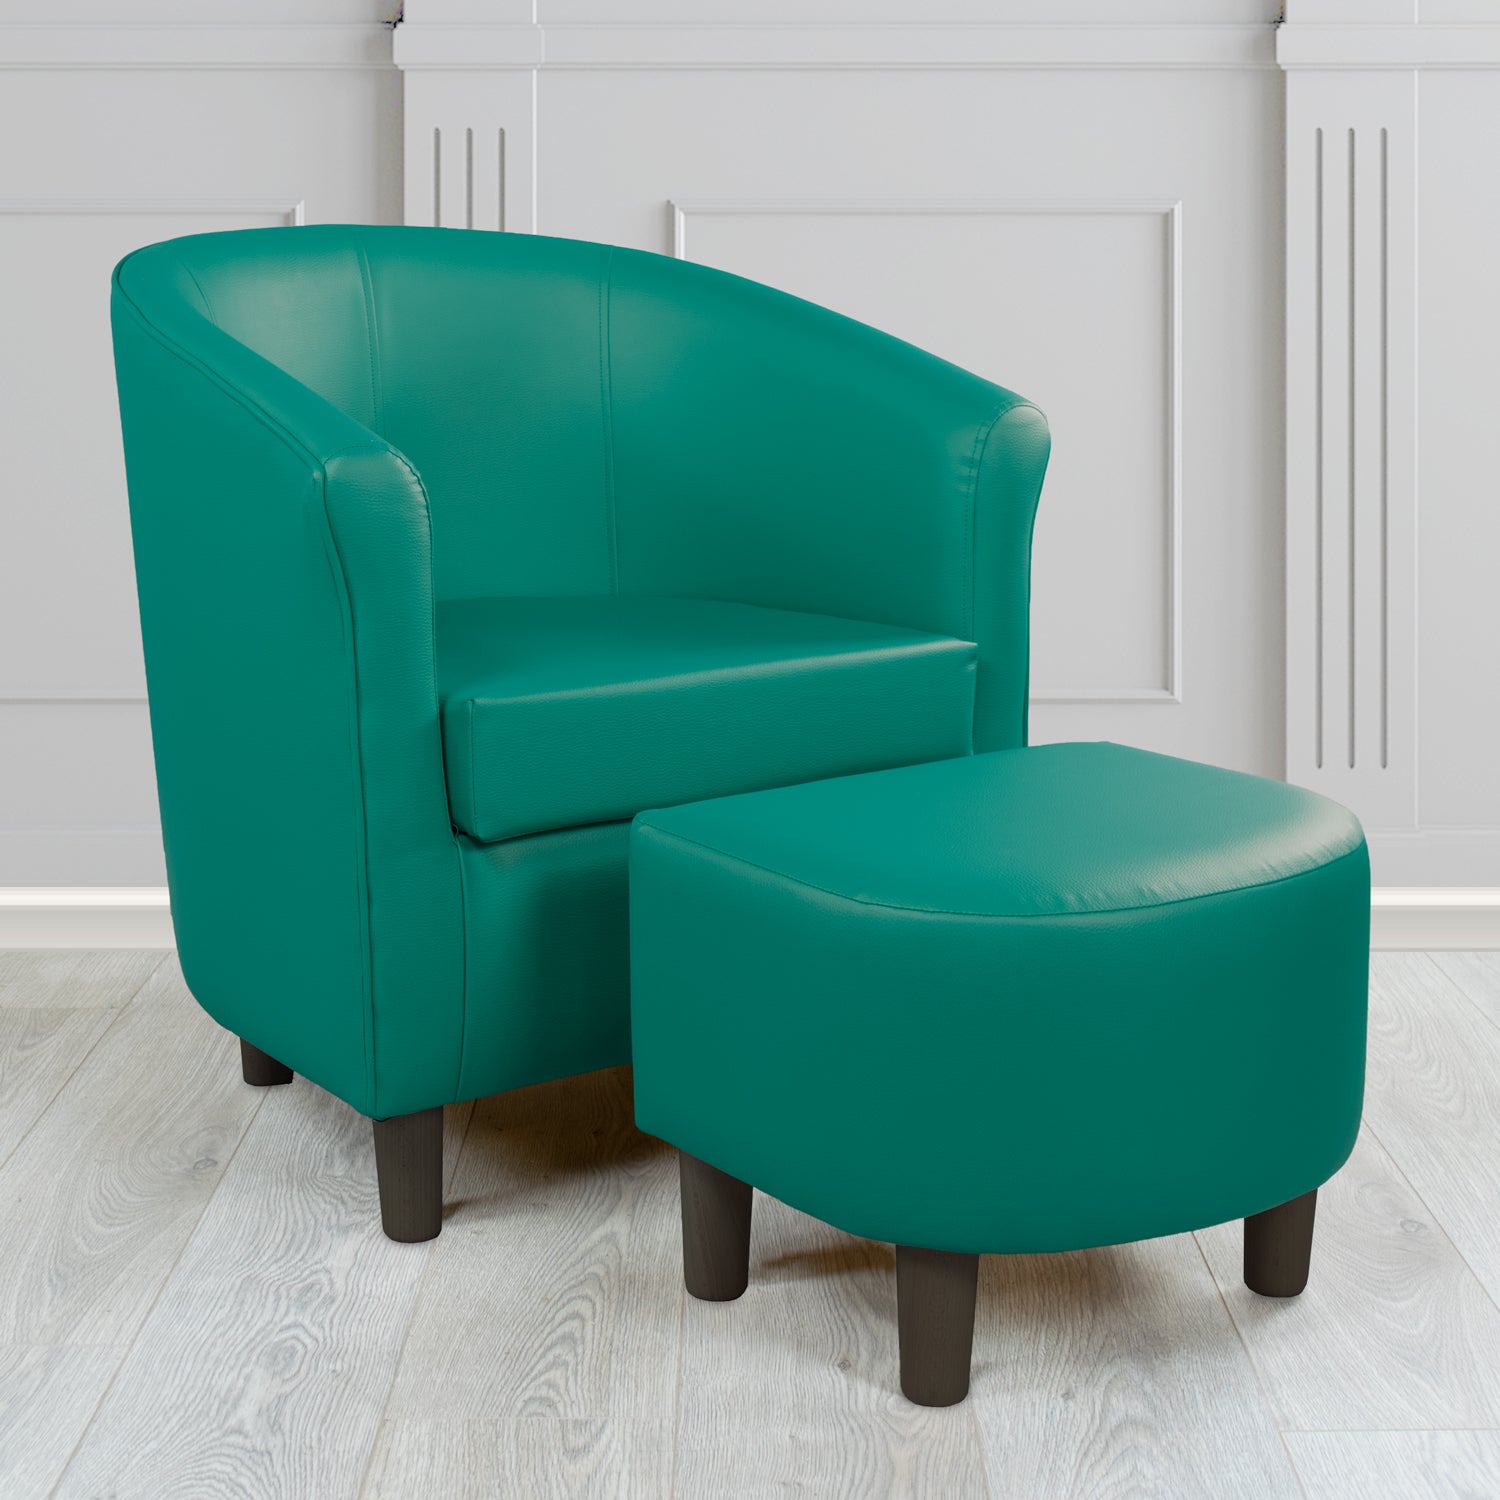 Teal Tub Chair with Footstool Sets | Blue/Green Tones